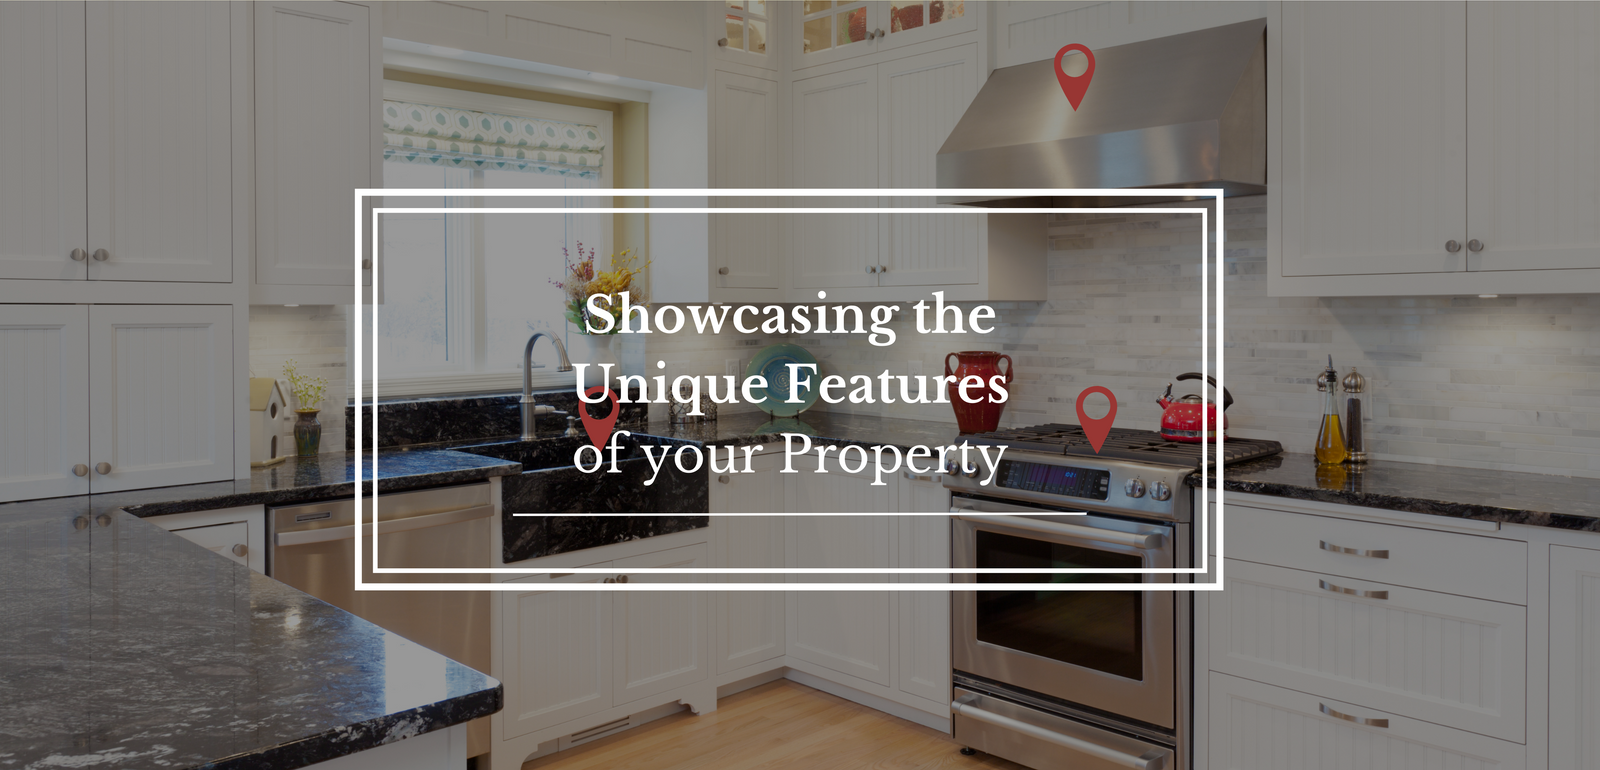 Showcasing the Unique Features of your Property